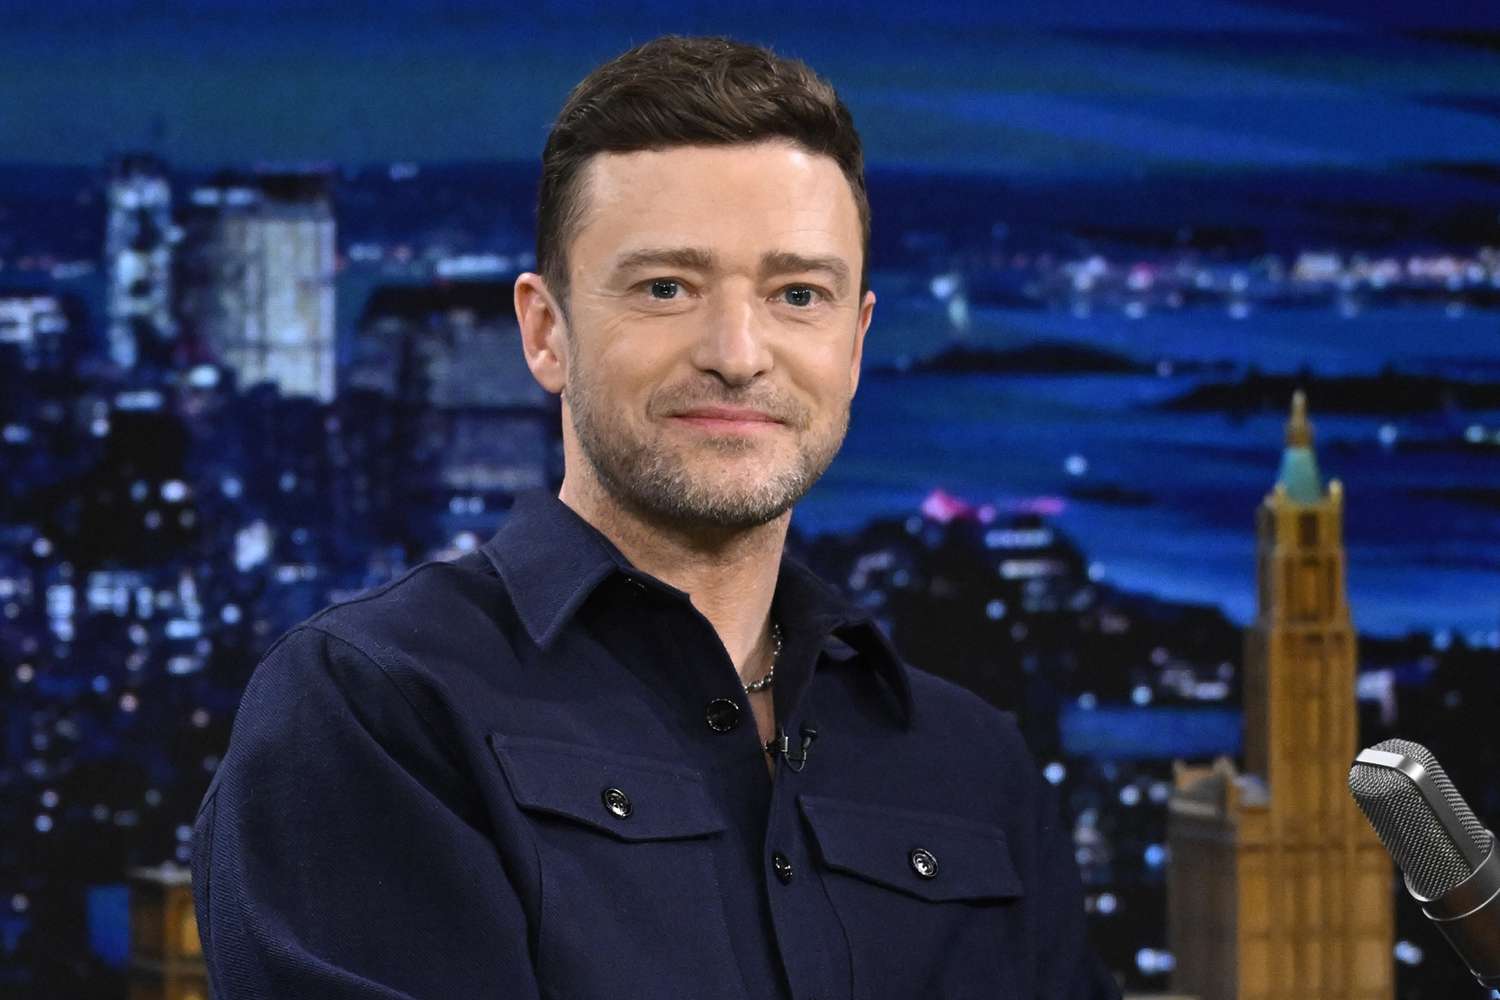 Justin Timberlake during an interview on THE TONIGHT SHOW STARRING JIMMY FALLON